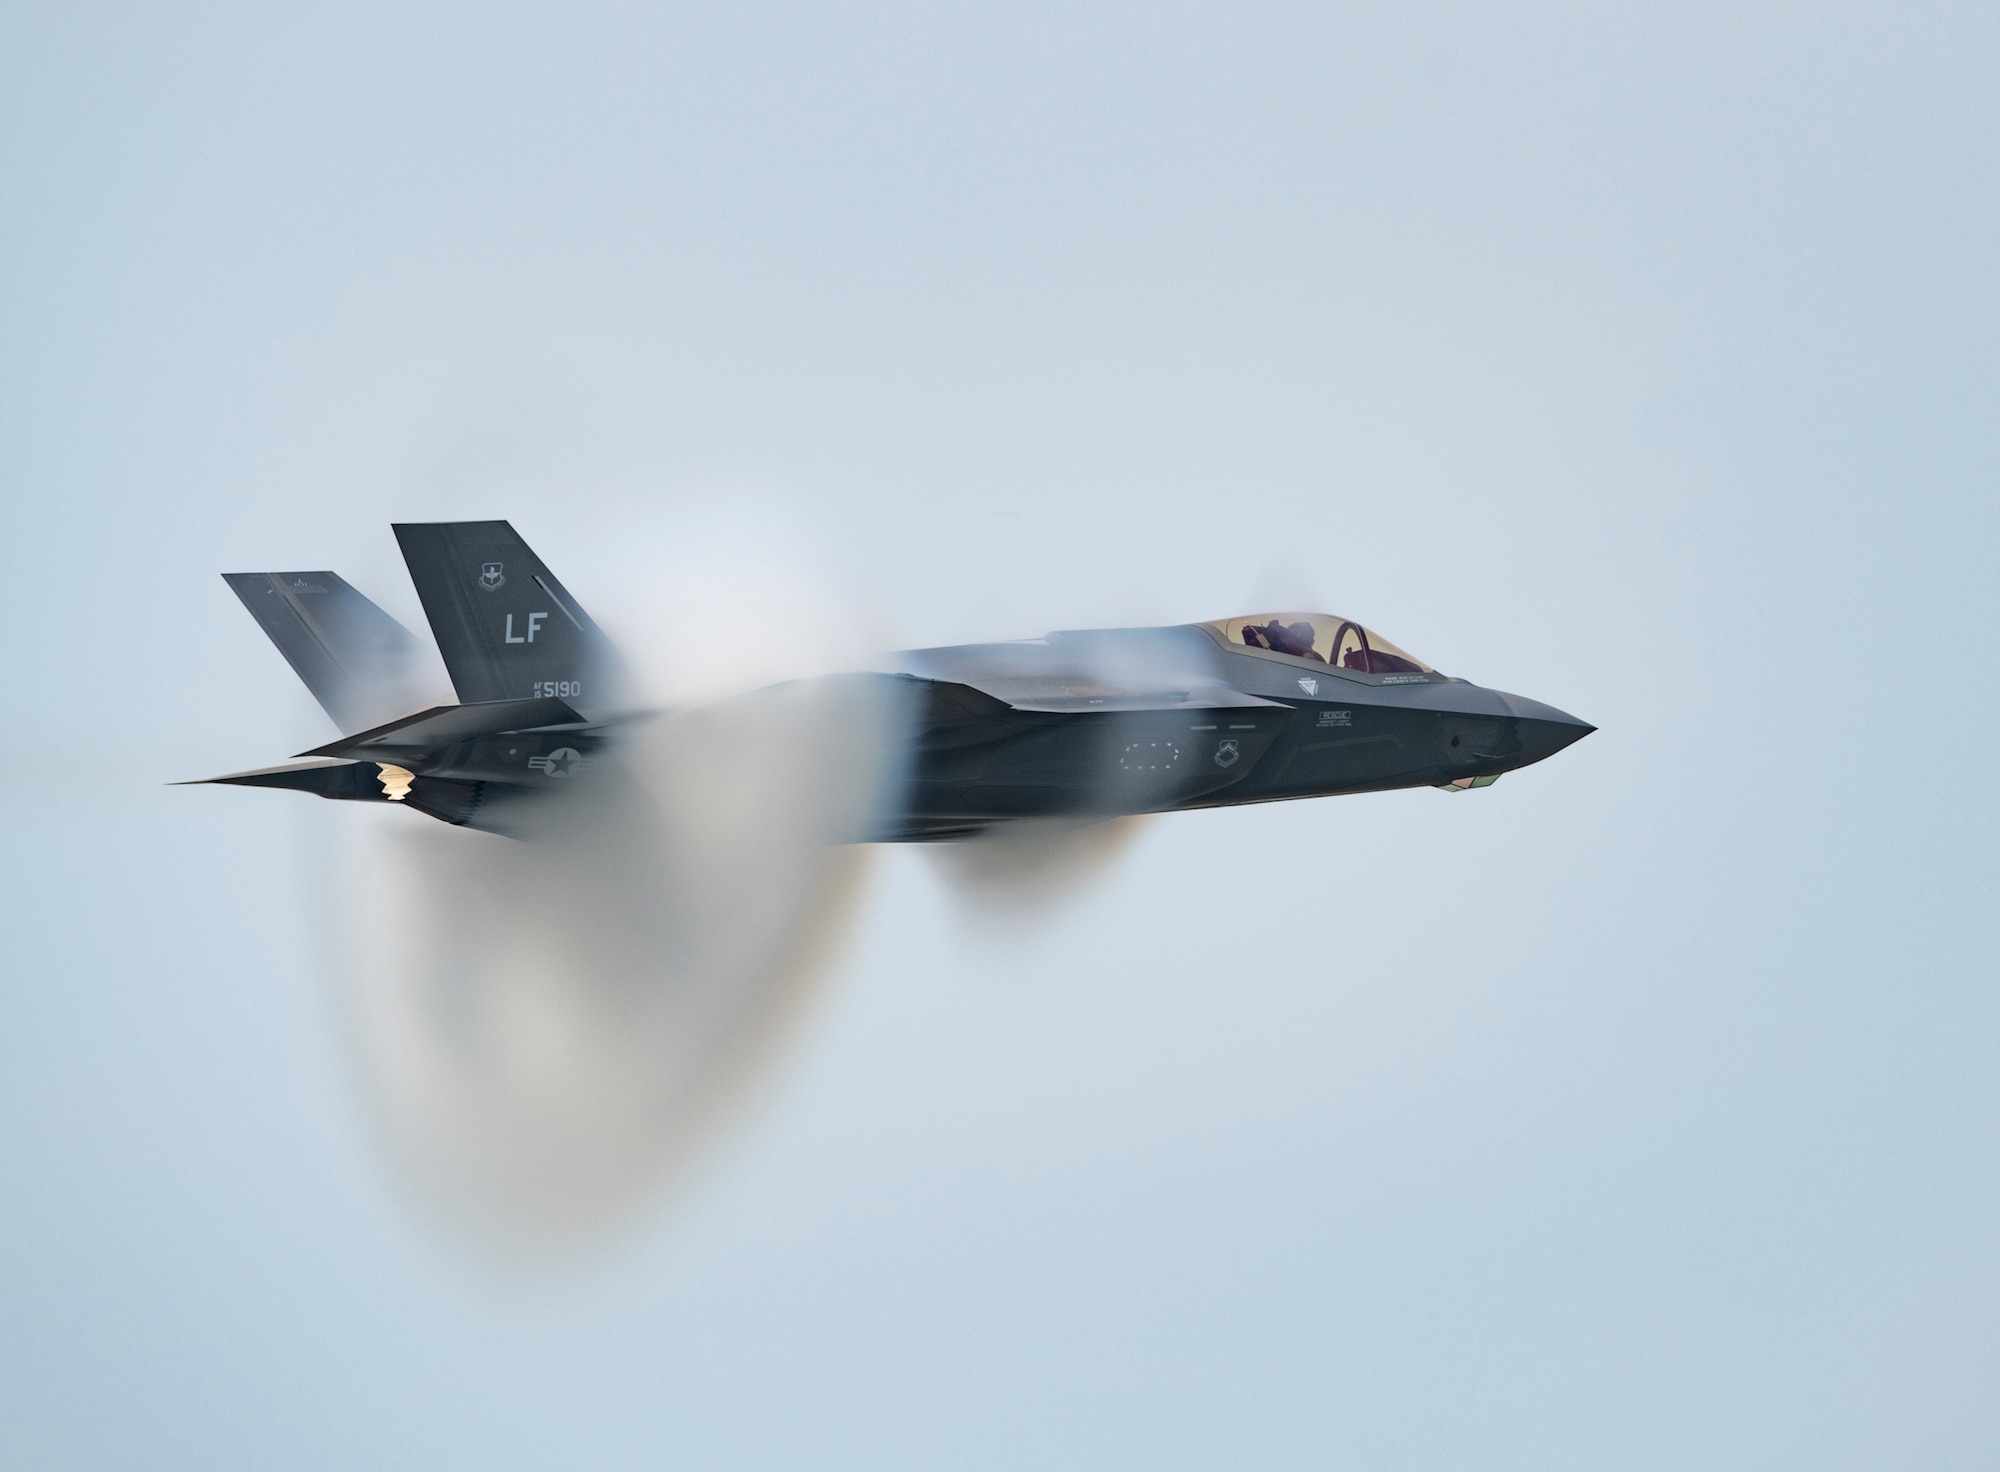 Capt. Andrew “Dojo” Olson, F-35 Demonstration Team pilot and commander performs a high-speed pass in an F-35A Lightning II during the Arctic Lightning Airshow July 13, 2019, at Eielson Air Force Base, Alaska. During the aerial maneuver, the jet reaches speeds of up to 750 miles per hour. (U.S. Air Force photo by Senior Airman Alexander Cook)